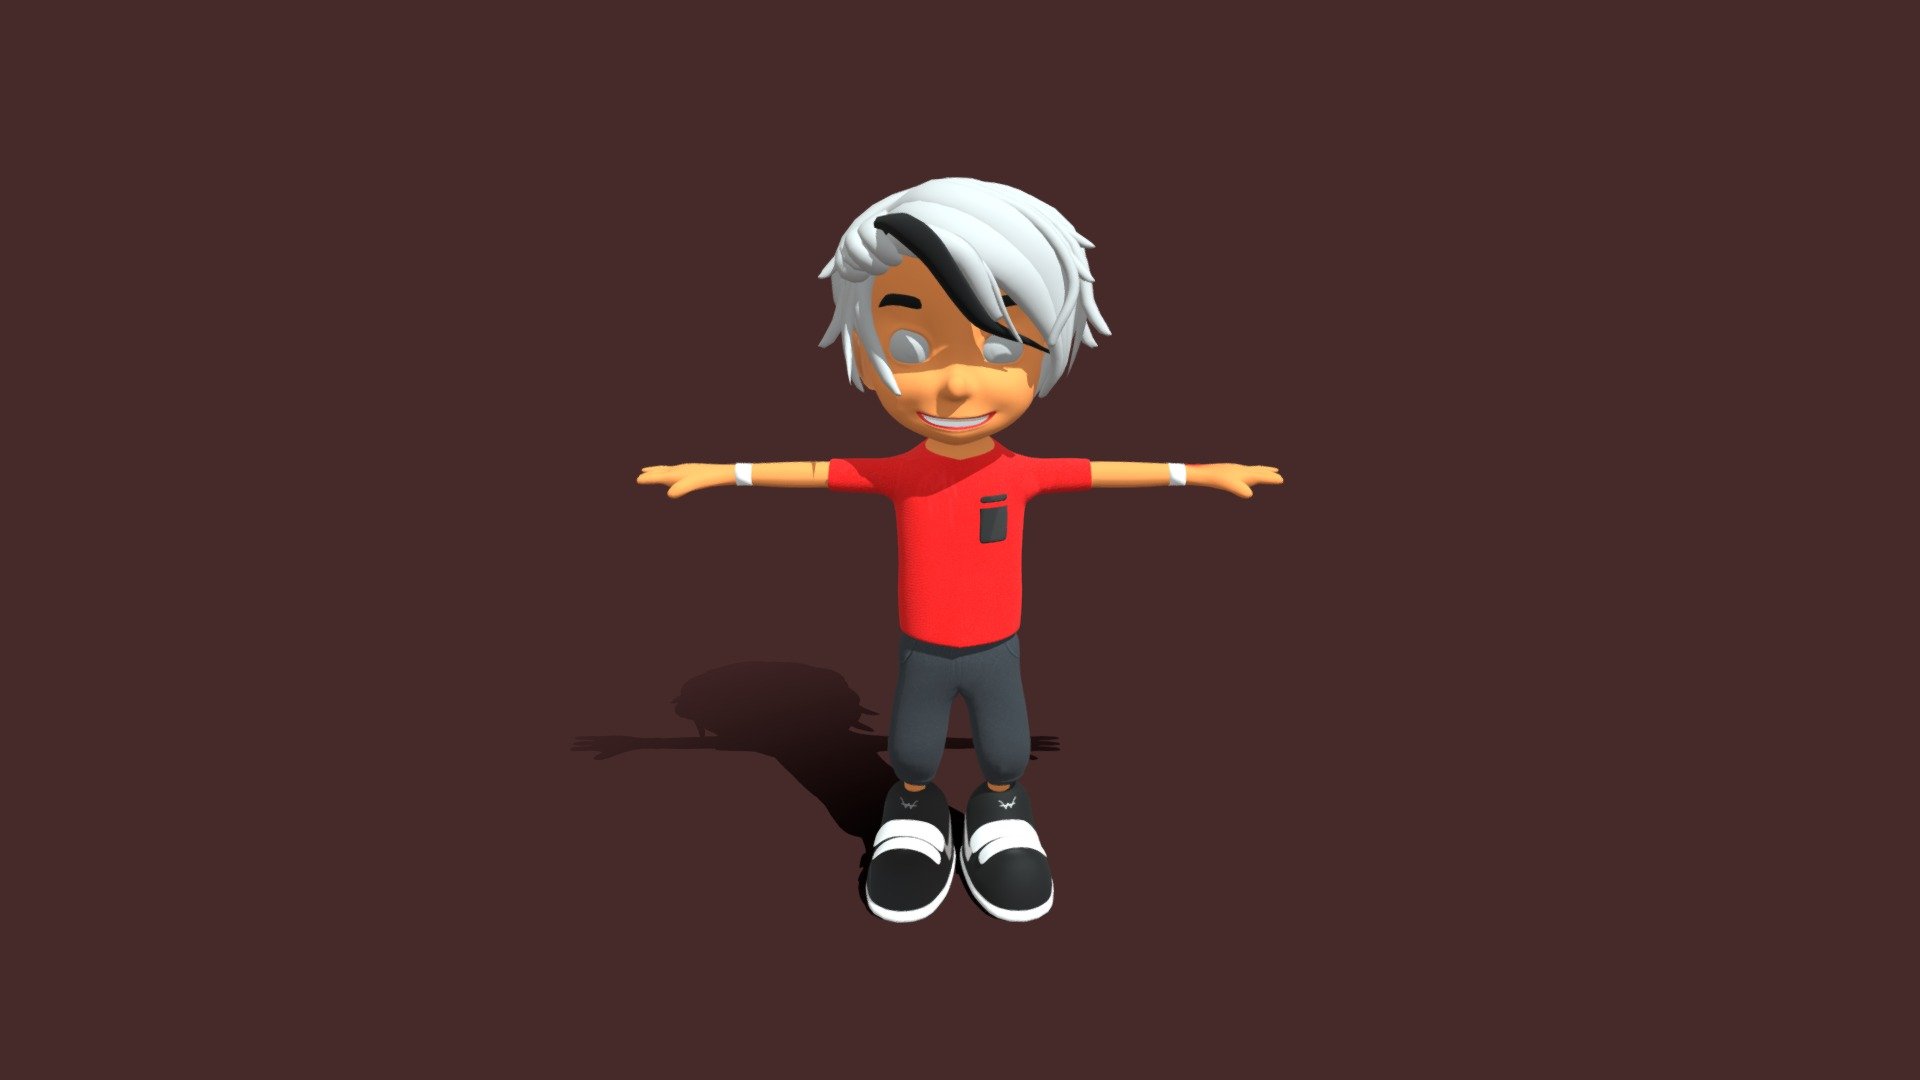 this is my original Character
u can using it for free
credit me if u using it
thank you - Kids [2] - Download Free 3D model by Surya.W.A (@surya3dmodel) 3d model